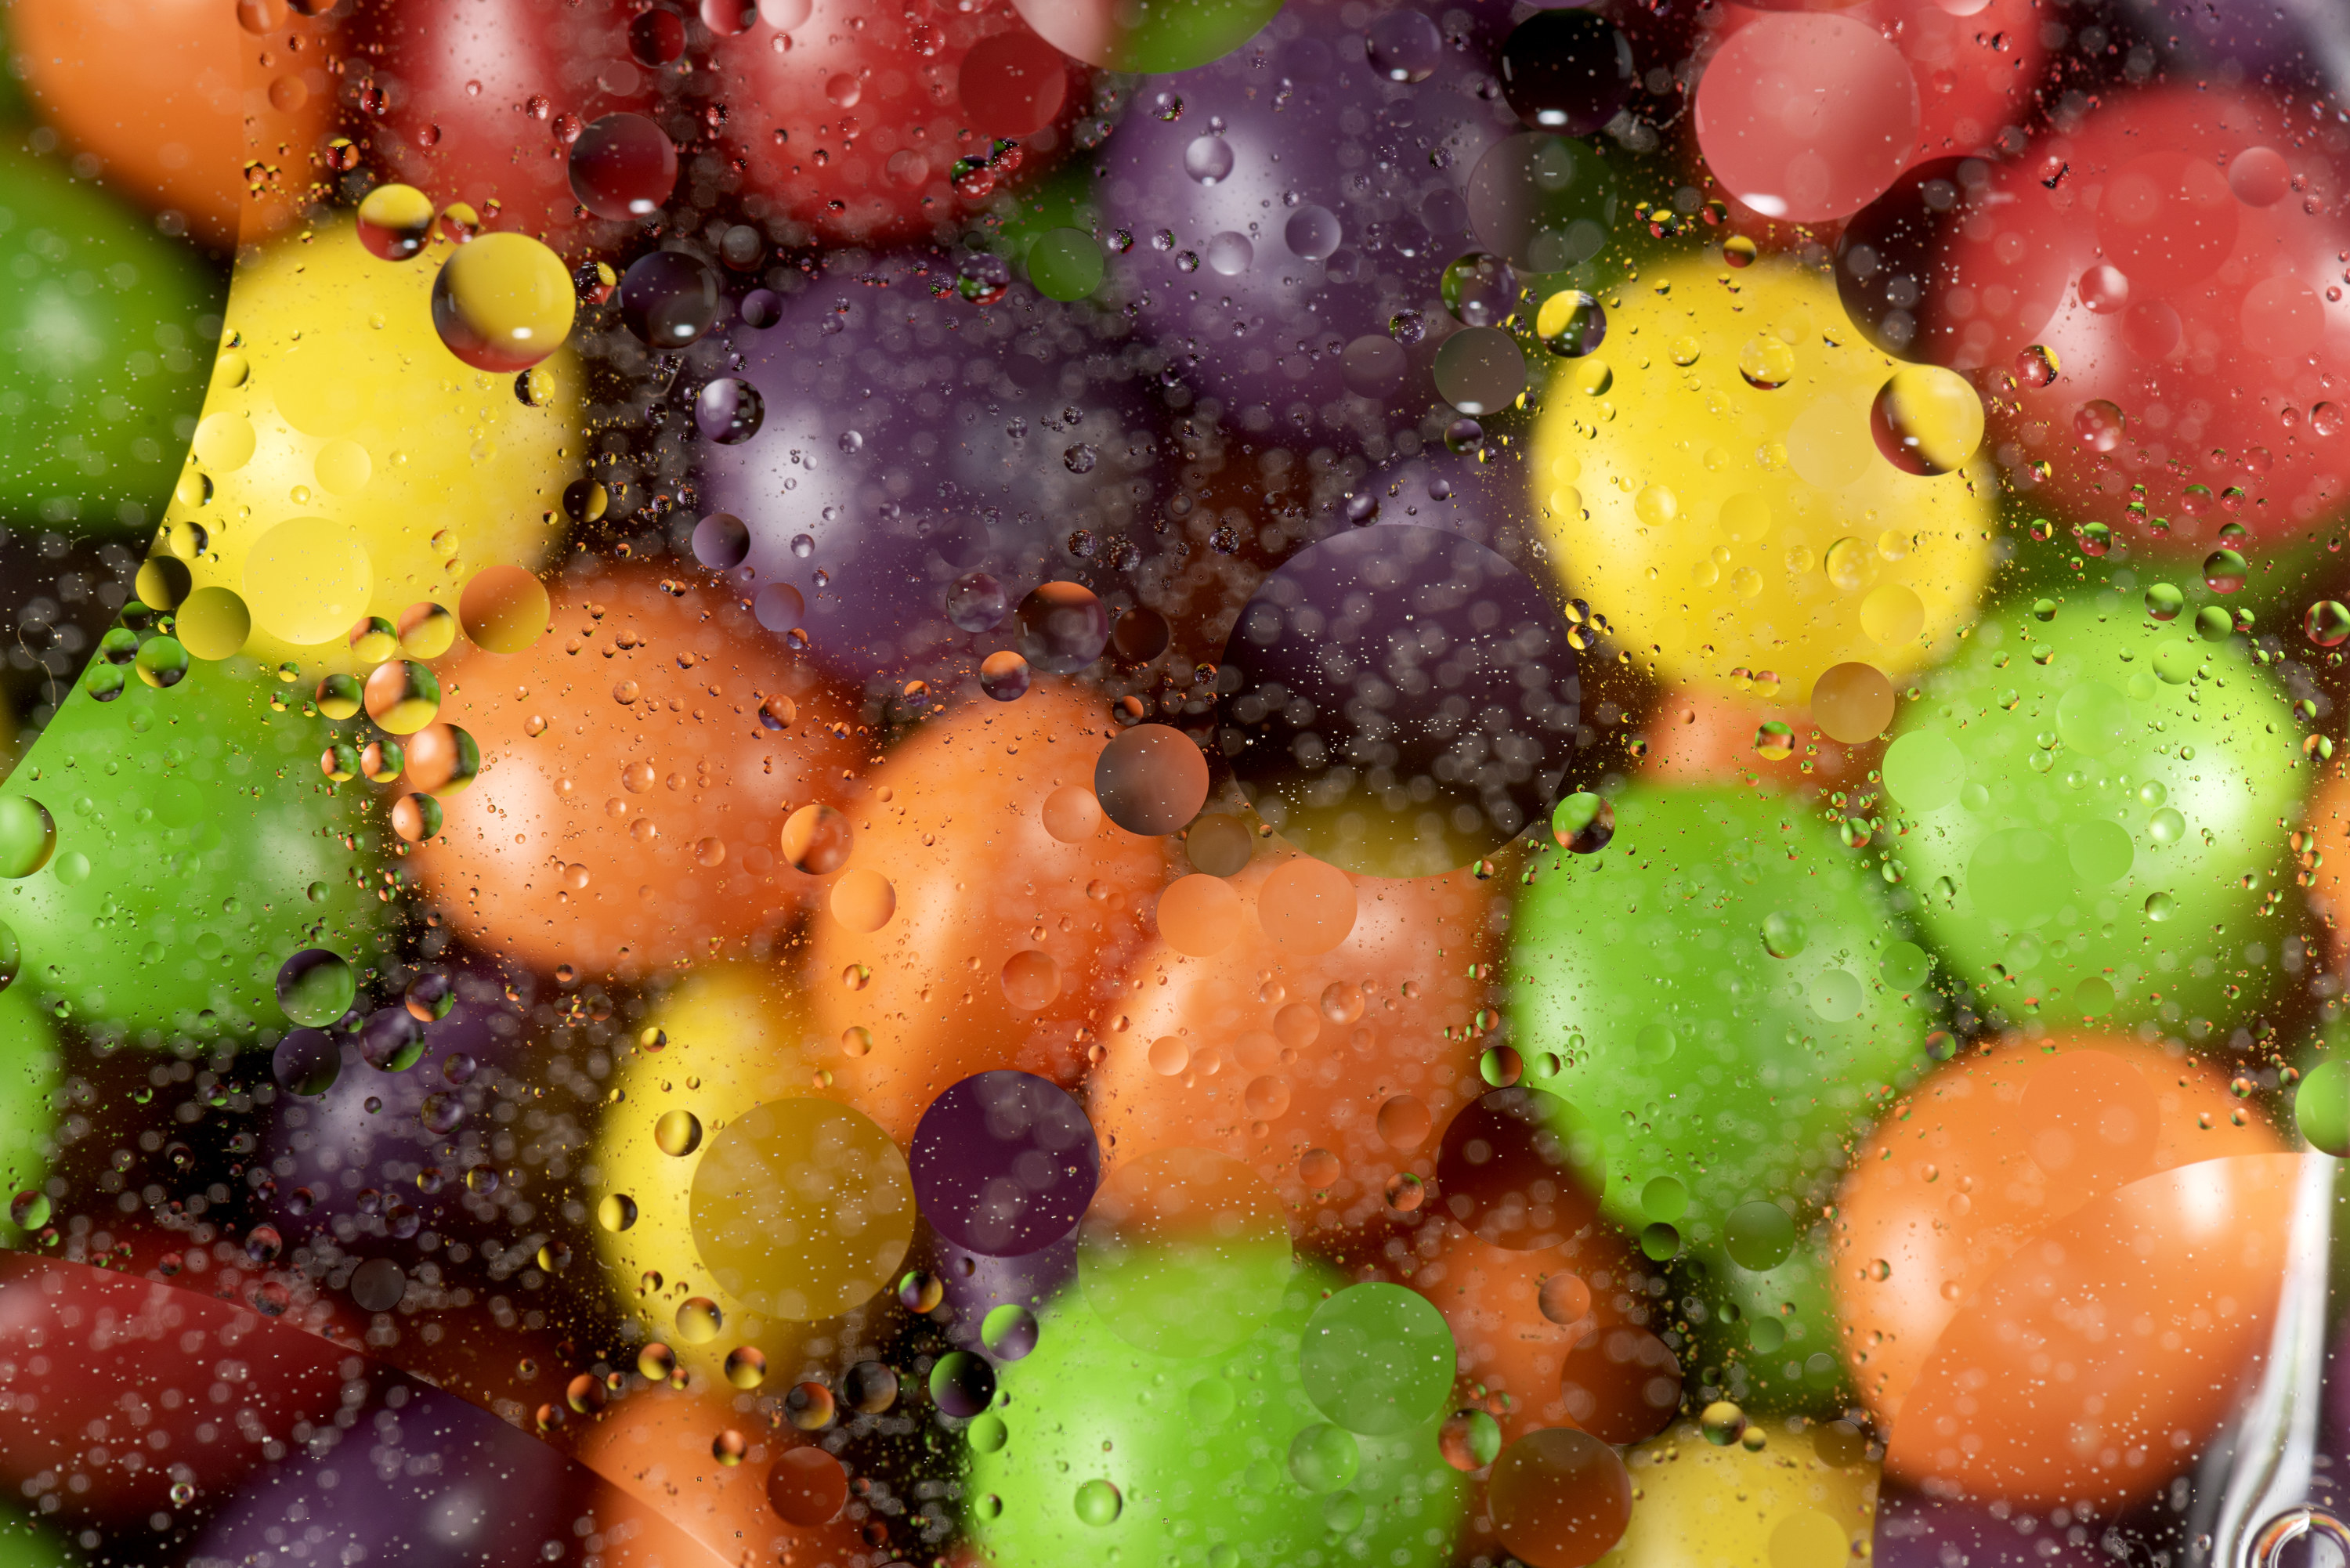 Colorful round candies behind a foggy layer of glass with water drops